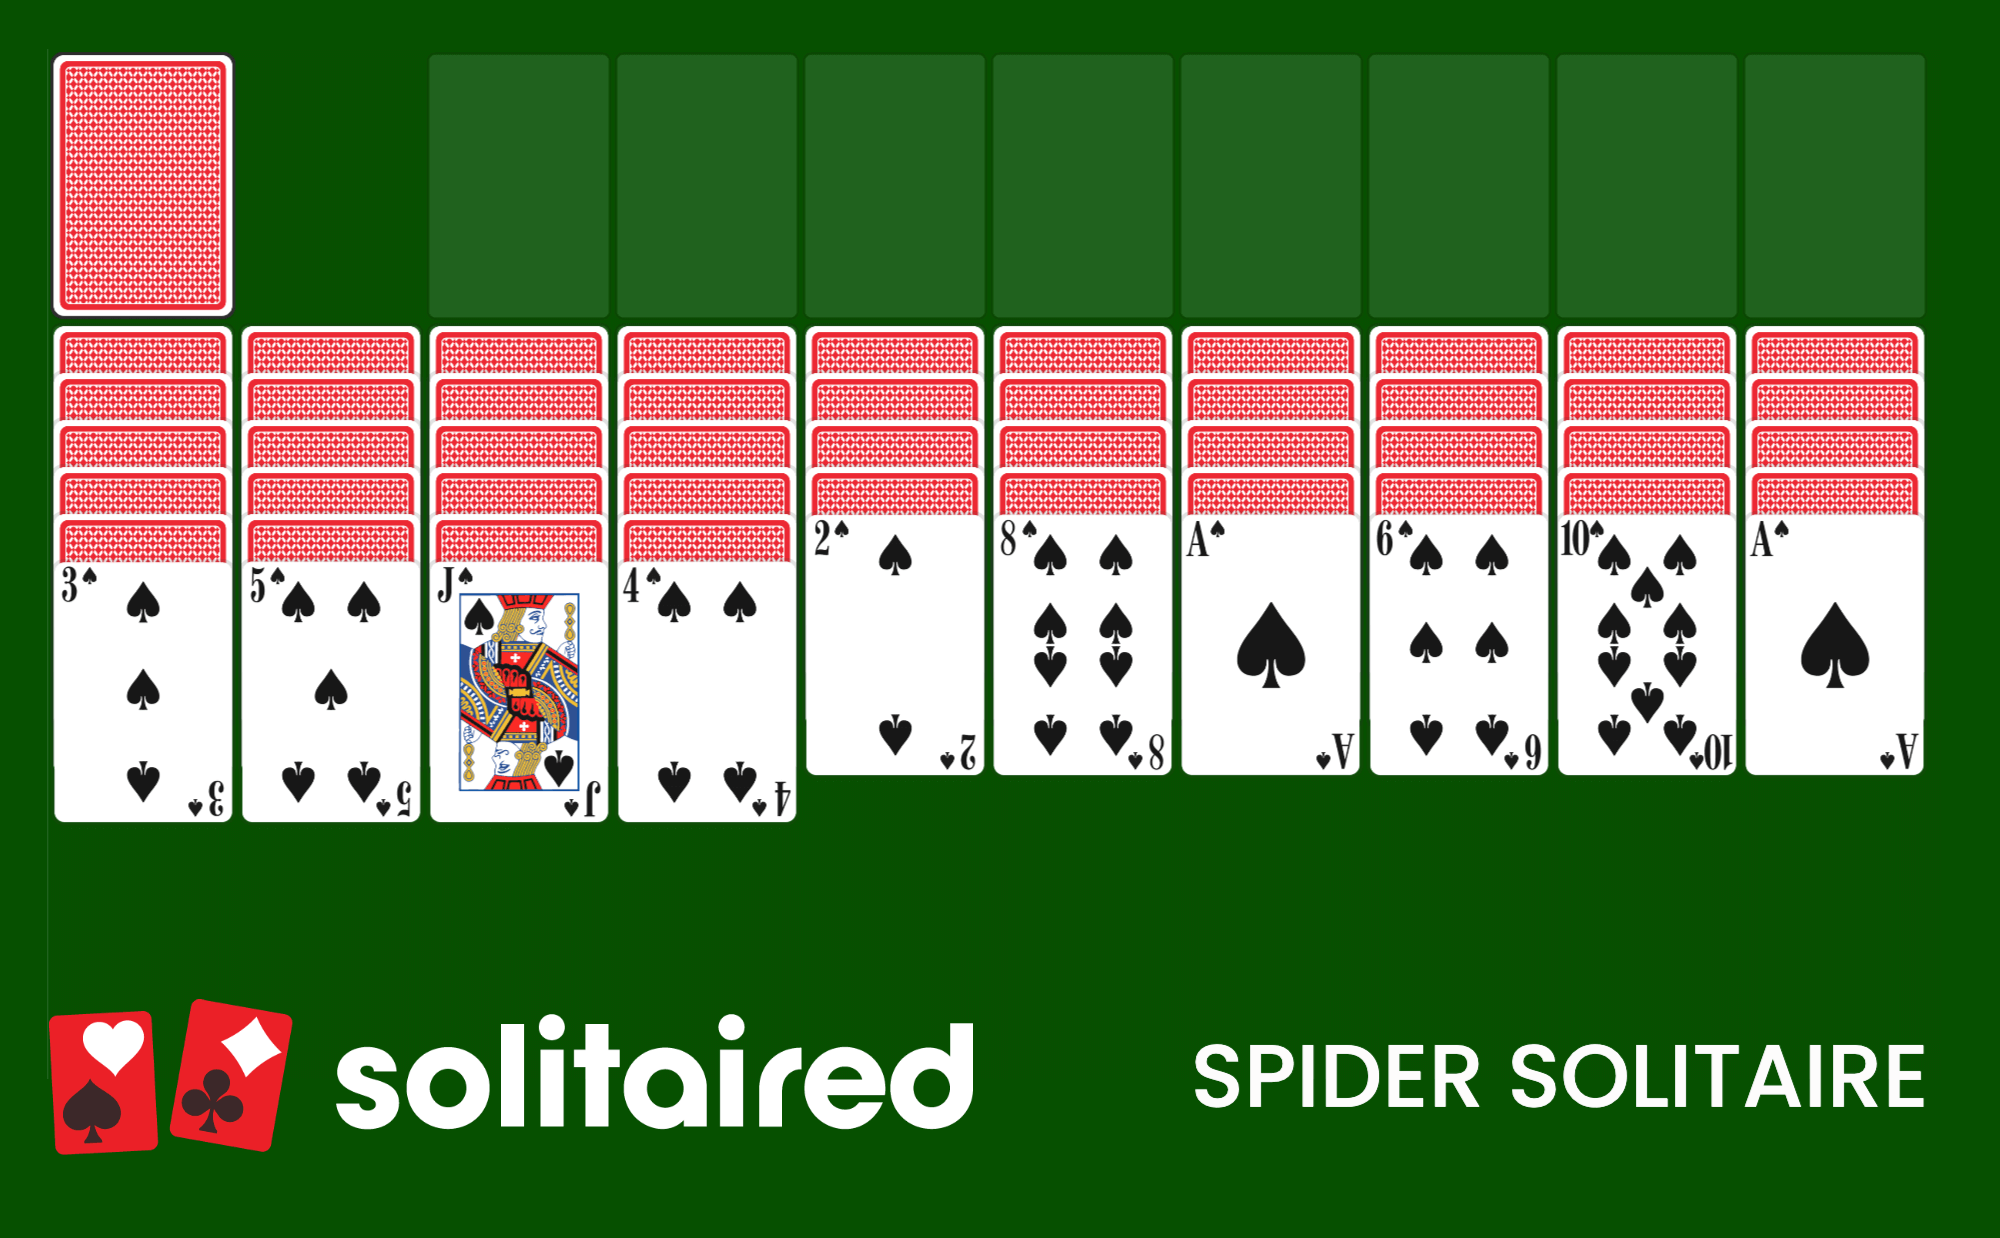 classic solitaire online free games